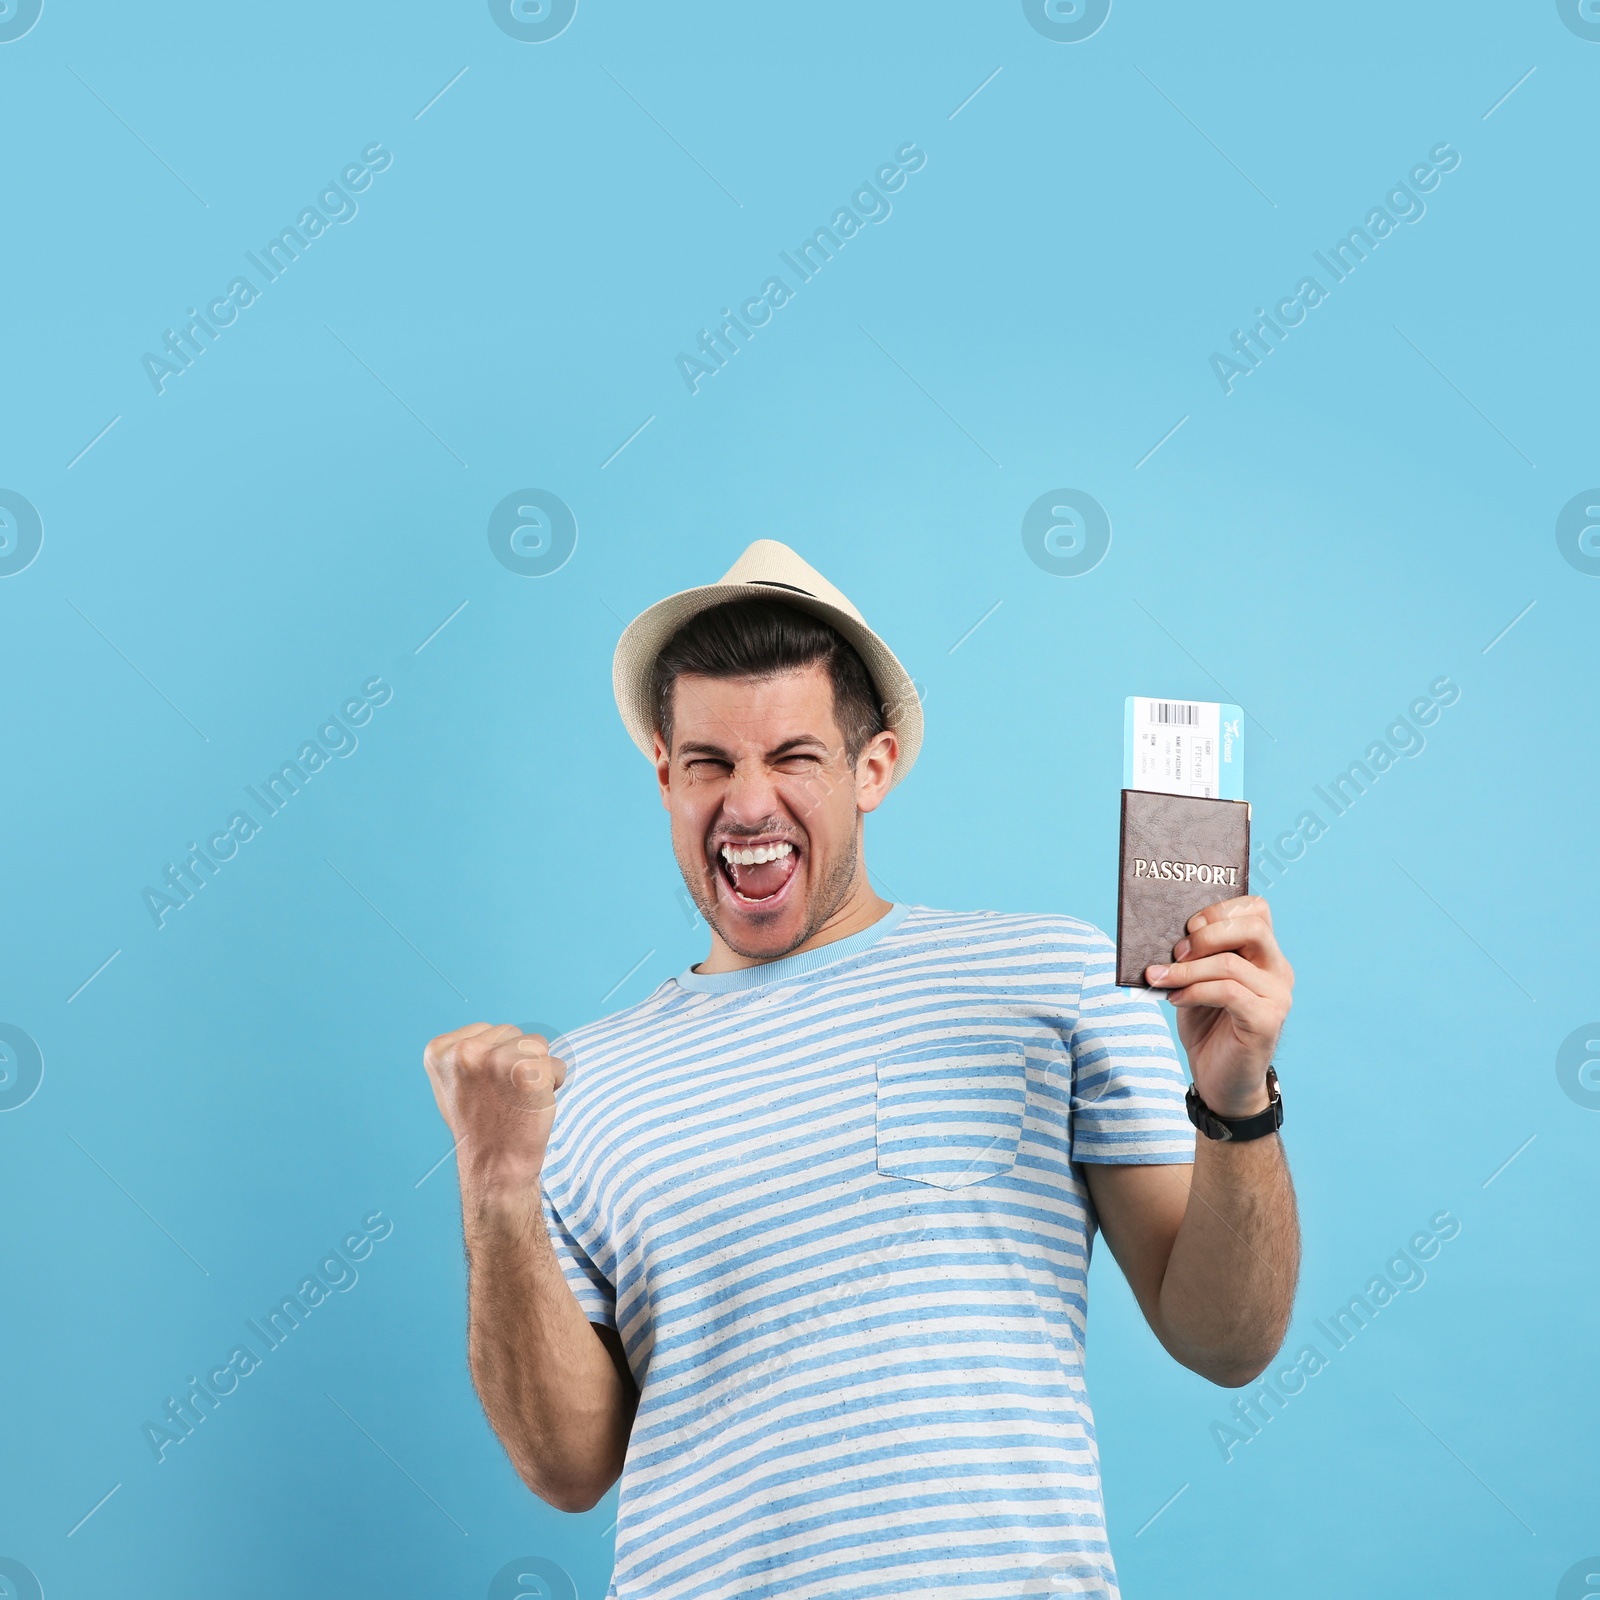 Photo of Excited male tourist holding passport with ticket on turquoise background